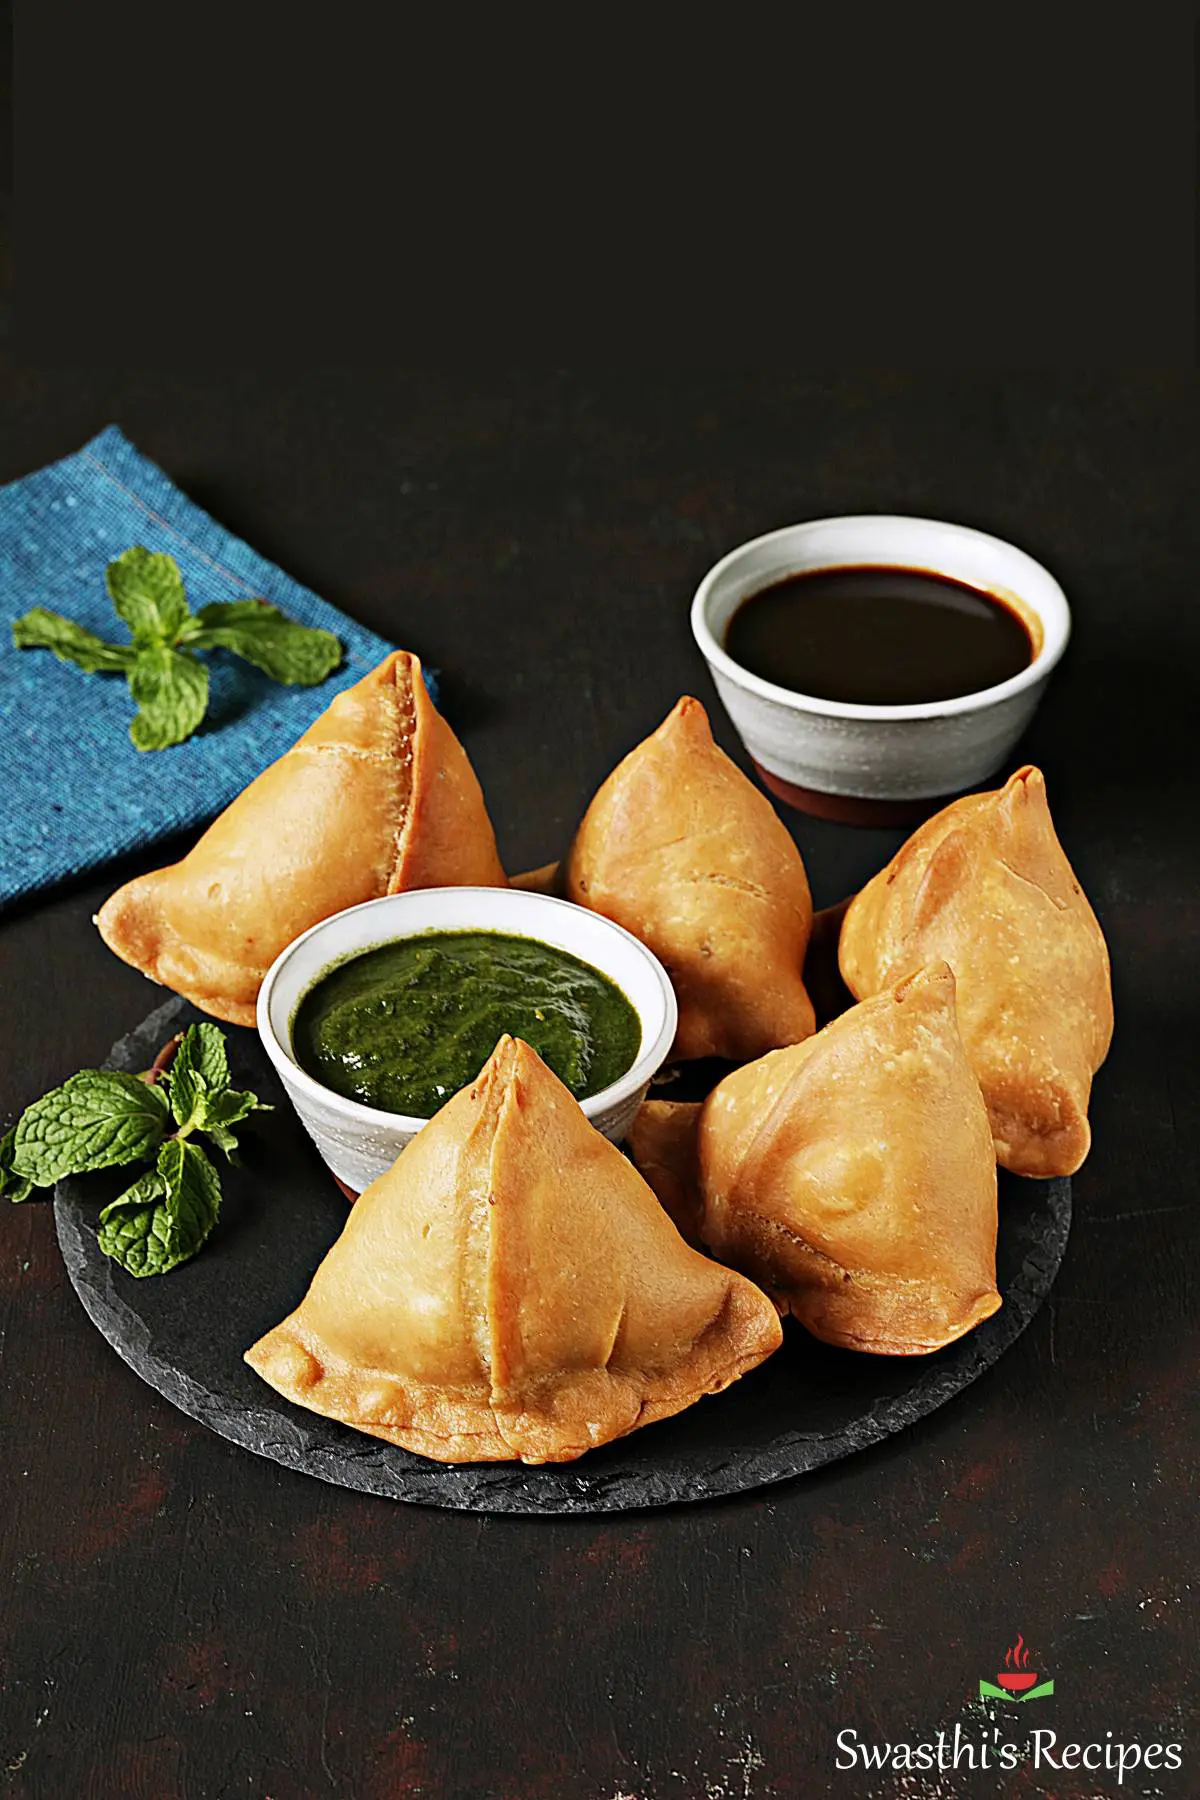 samosa made with spiced potato stuffing, served with green chutney